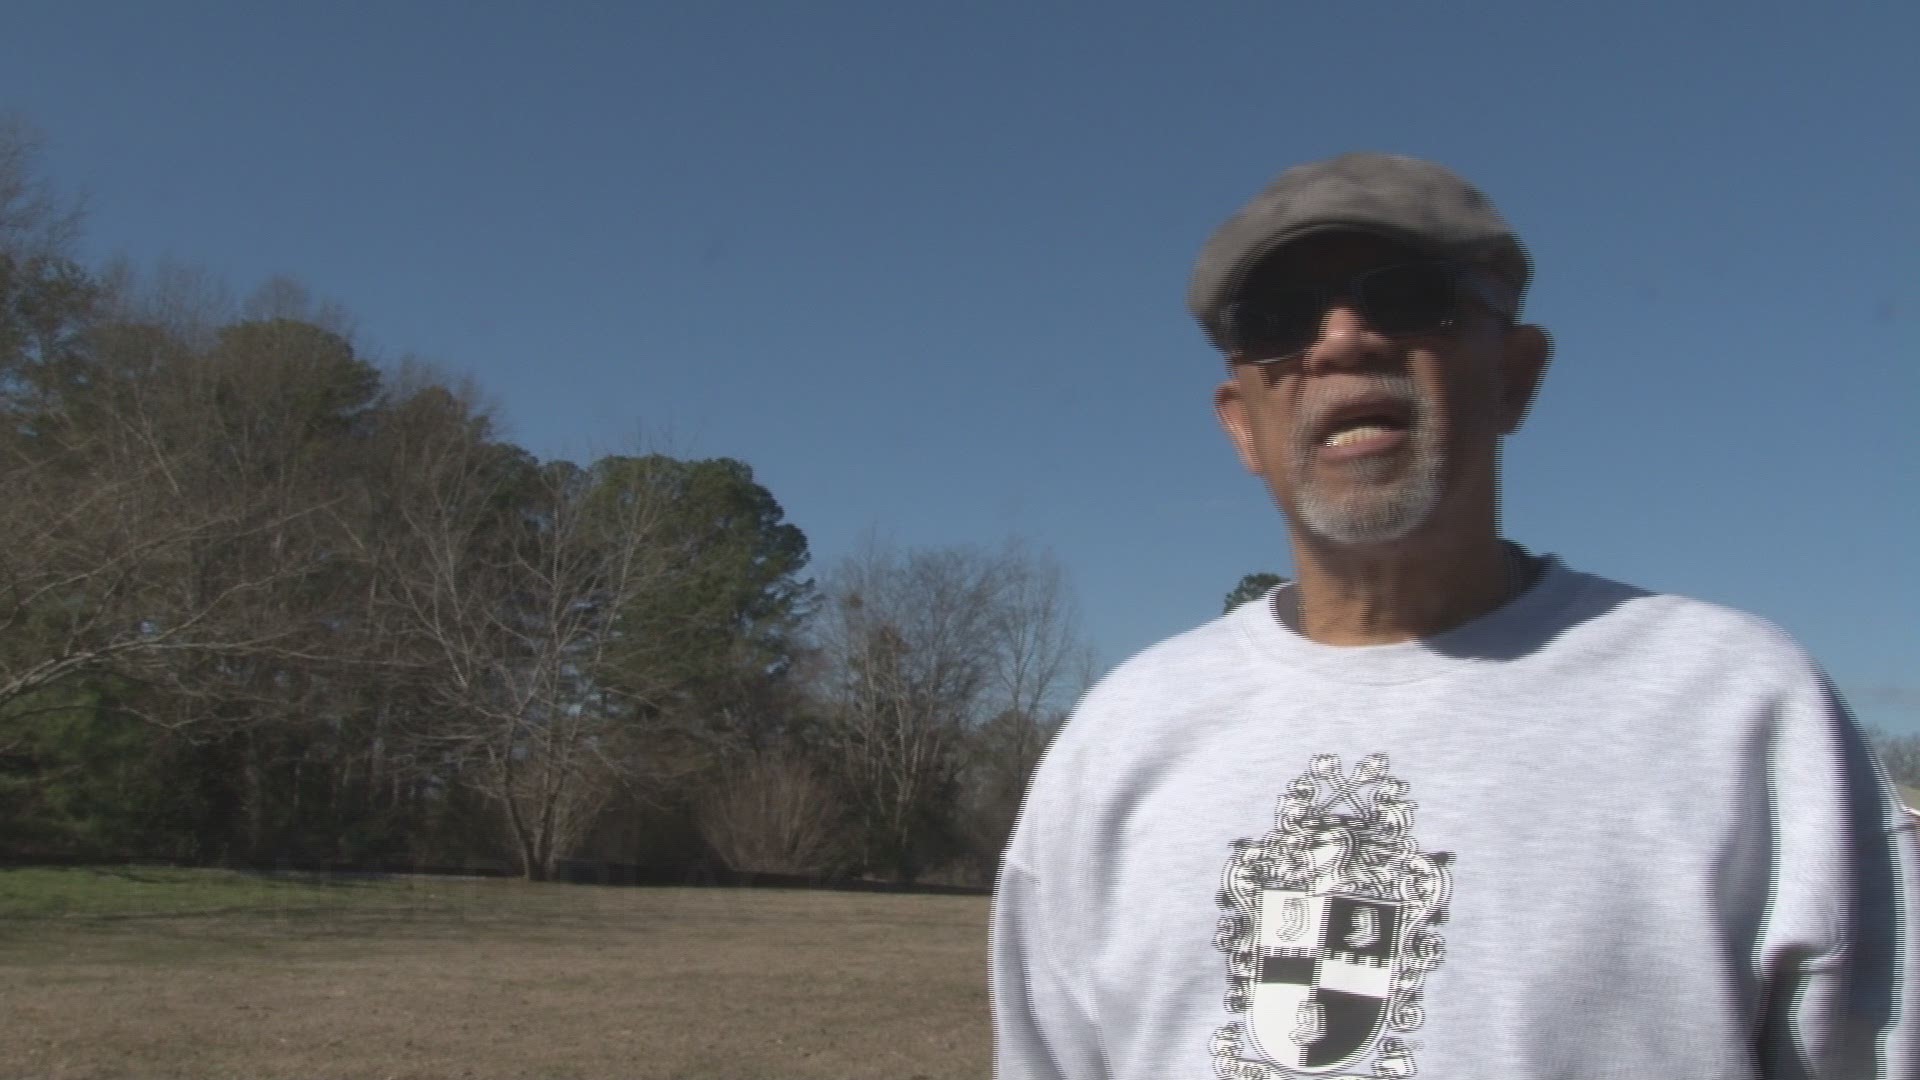 Donald Black is part of the community group trying to bring a memorial marker to Jones County to honor those that were lynched in the county. He hopes the marker will bring closure to the situation.